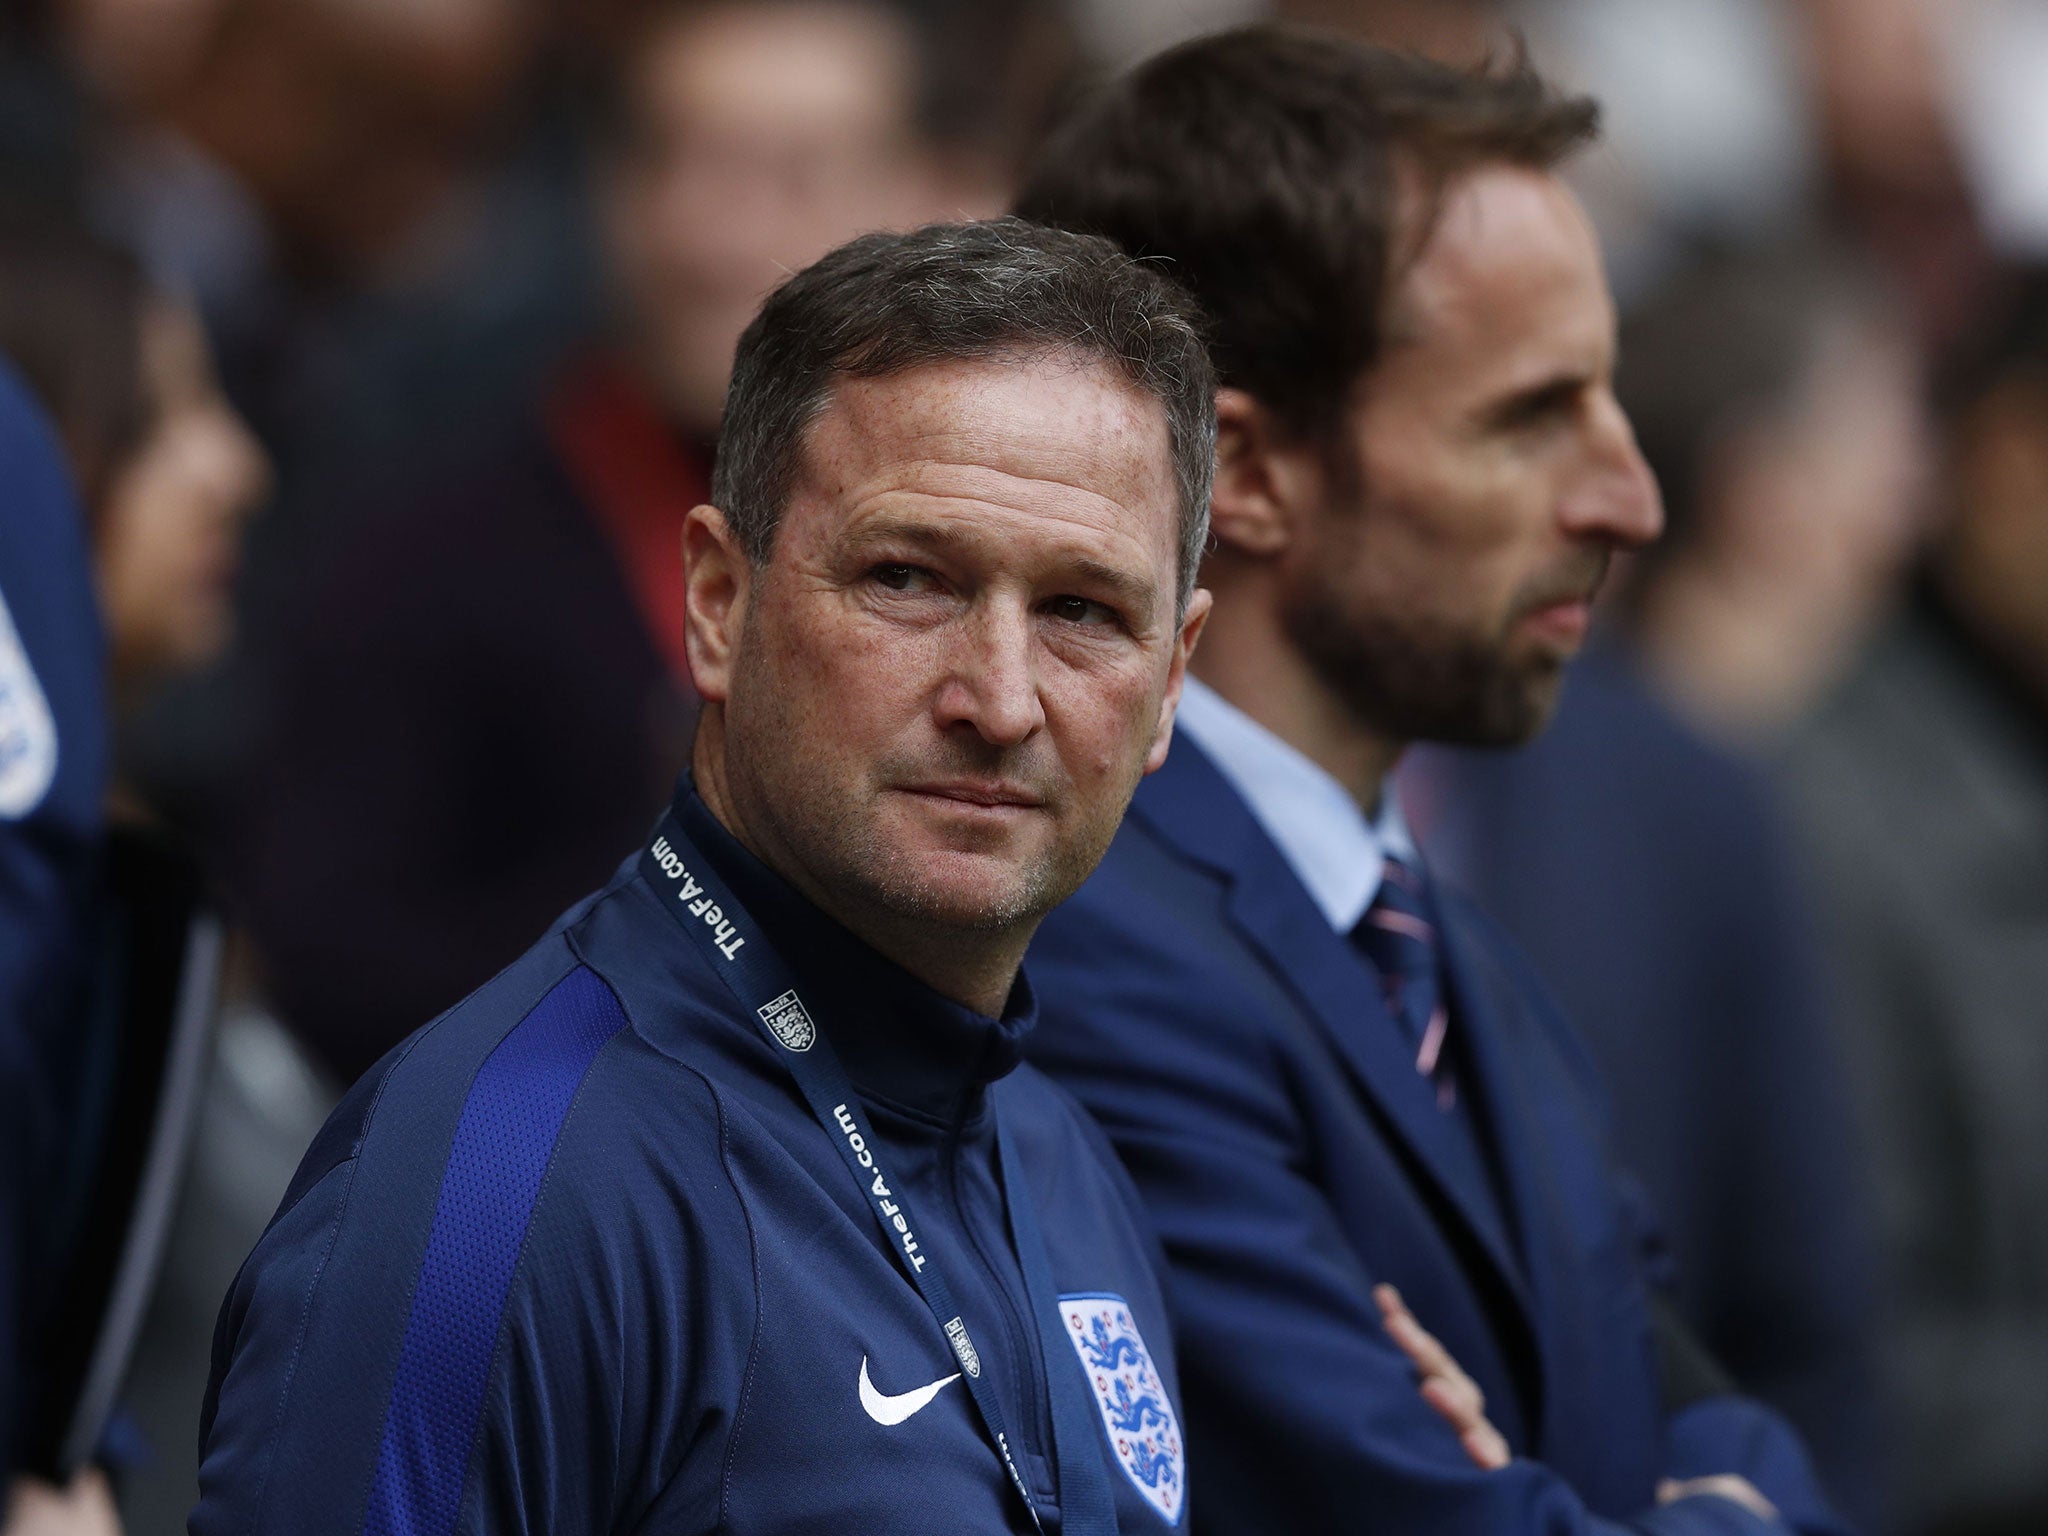 Steve Holland left Chelsea after eight years at the club